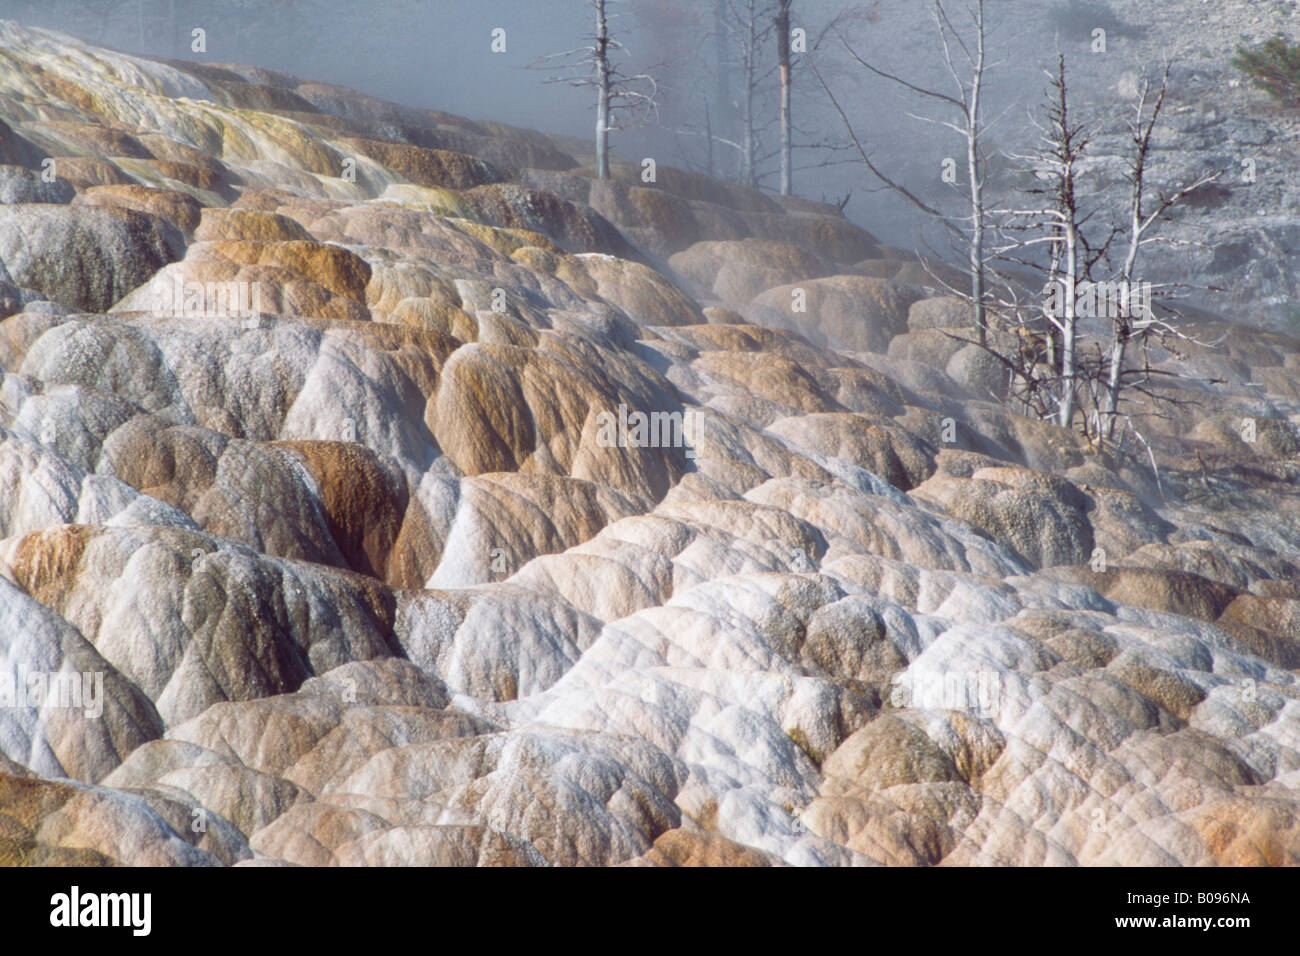 Calc-sinter terraces, Yellowstone National Park, Wyoming, USA Banque D'Images